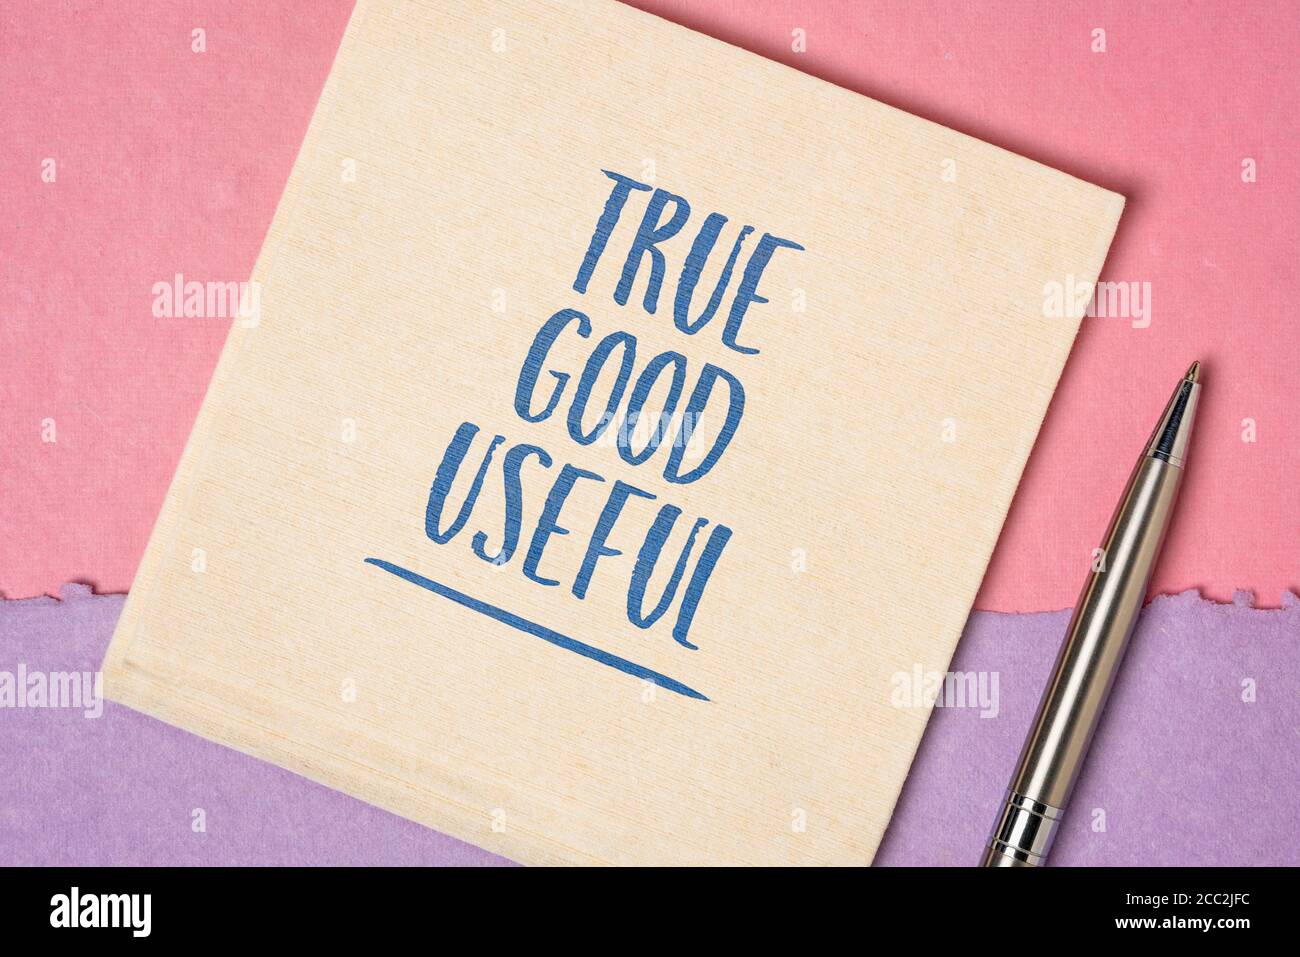 true, good, useful inspirational word abstract - handwriting on a napkin, business and personal development concept Stock Photo